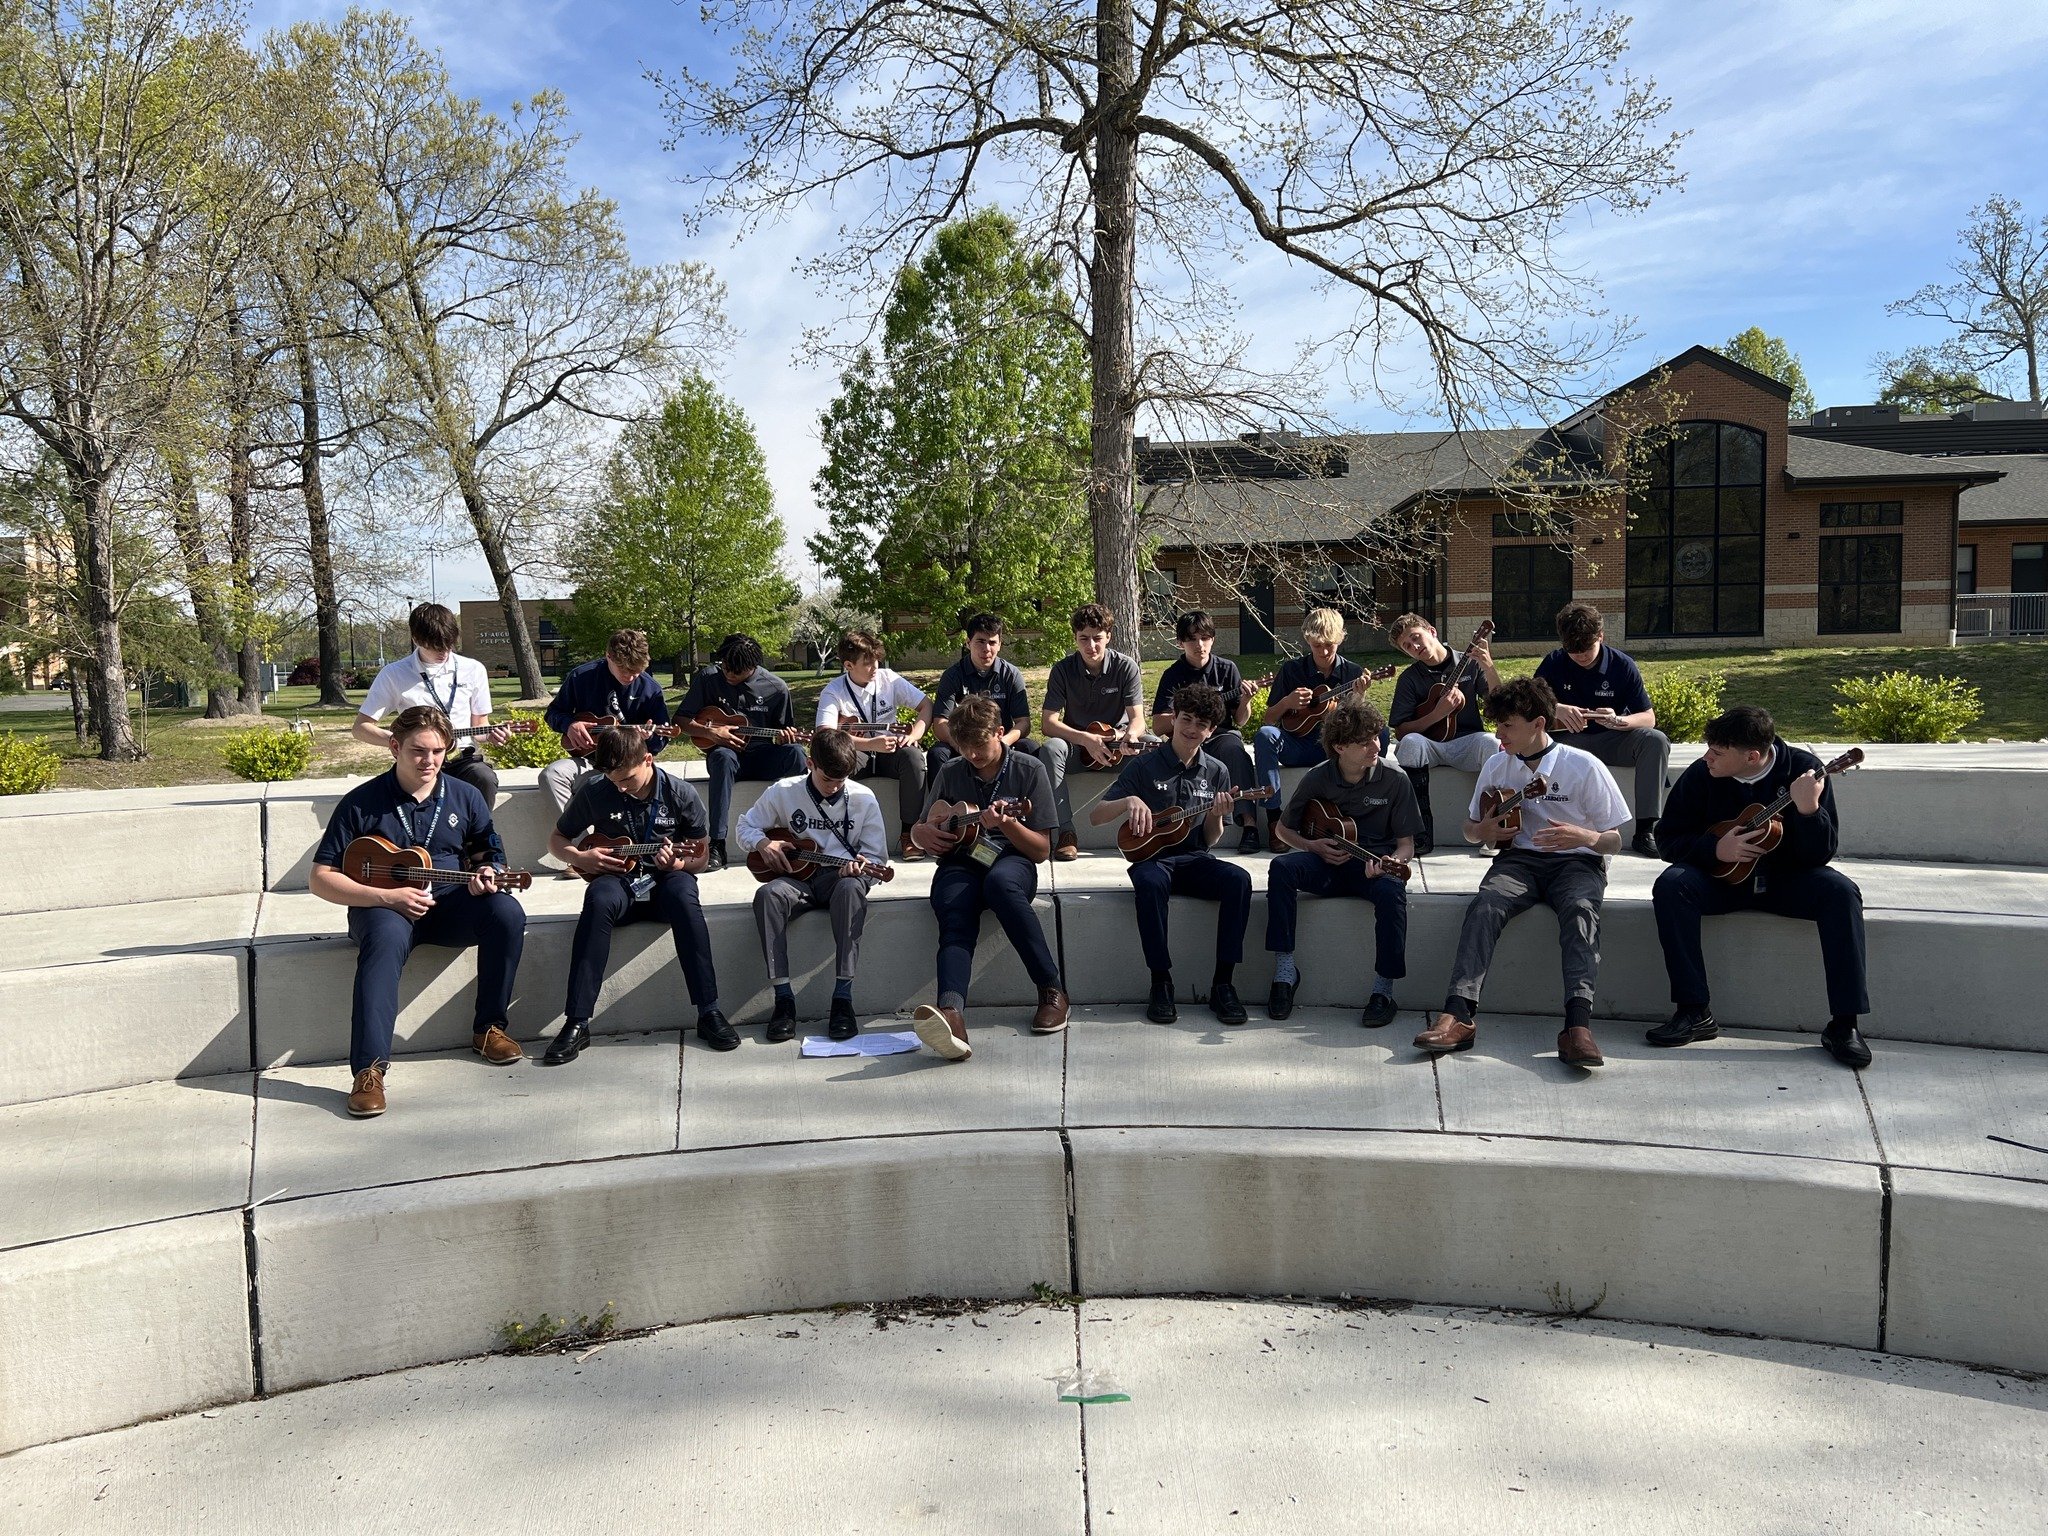 🎶 Mr. Muller's Ukulele class took advantage of the beautiful day and took their tunes outdoors at the Class of 2022 Amphitheater.  They spent the picture-perfect period under the sun brushing up on the alma mater!

#ItsAlwaysSunnyinRichland ☀️